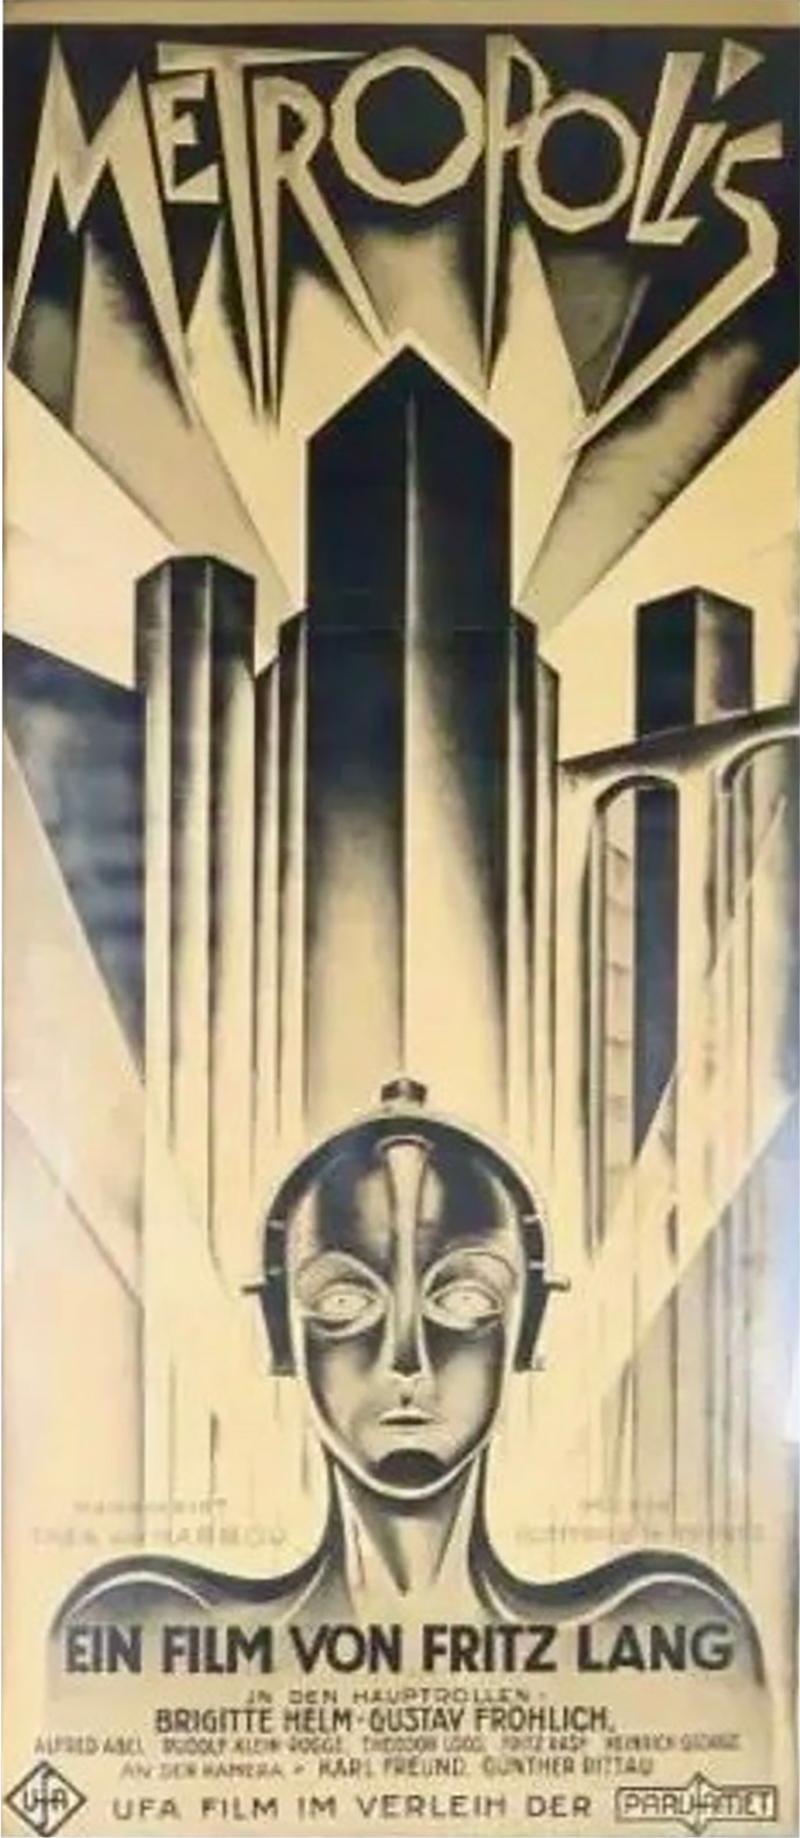 Art Deco Style Metropolis Large Framed 3 Sheet Lithograph Poster